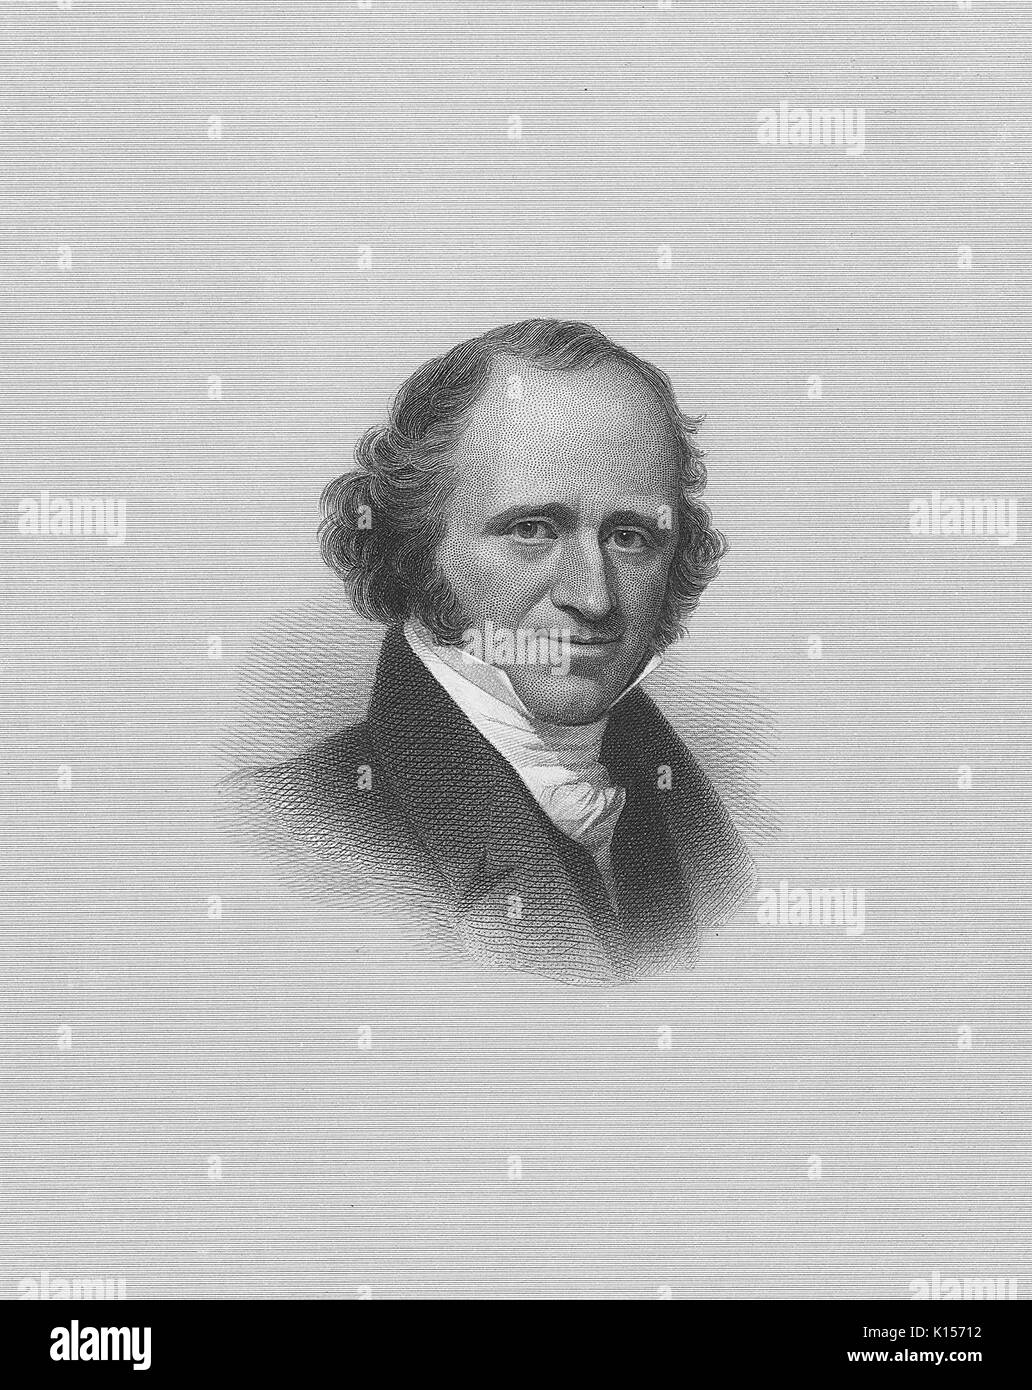 Portrait of Martin Van Buren, 8th President of the United States of America, 1837. From the New York Public Library. Stock Photo